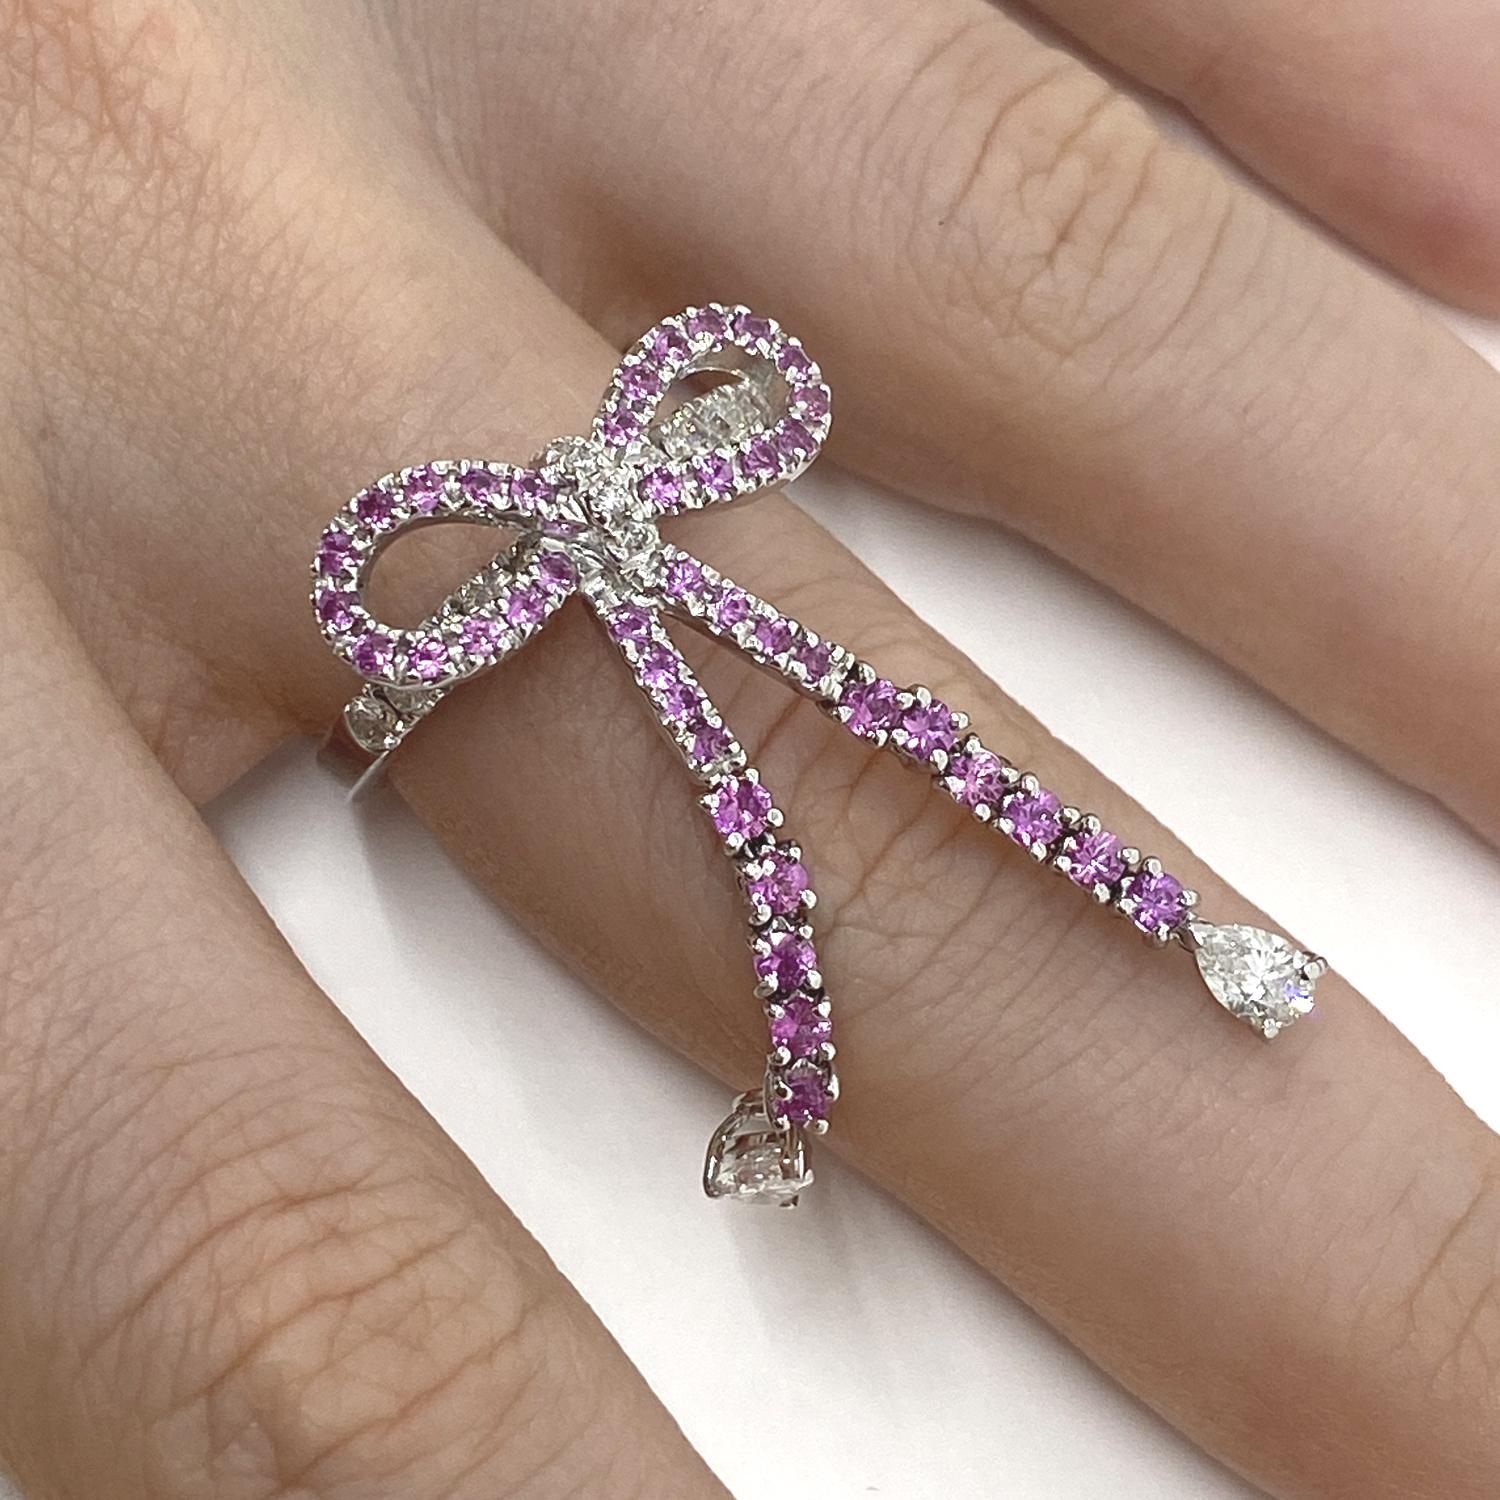 Staurino Fratelli Signed Ring made of 18kt white gold with natural brilliant-cut pink sapphires for ct.0.92 and natural brilliant-cut white diamonds for ct.0.97
-------------------------------------------------

Important Note : In order to speed up